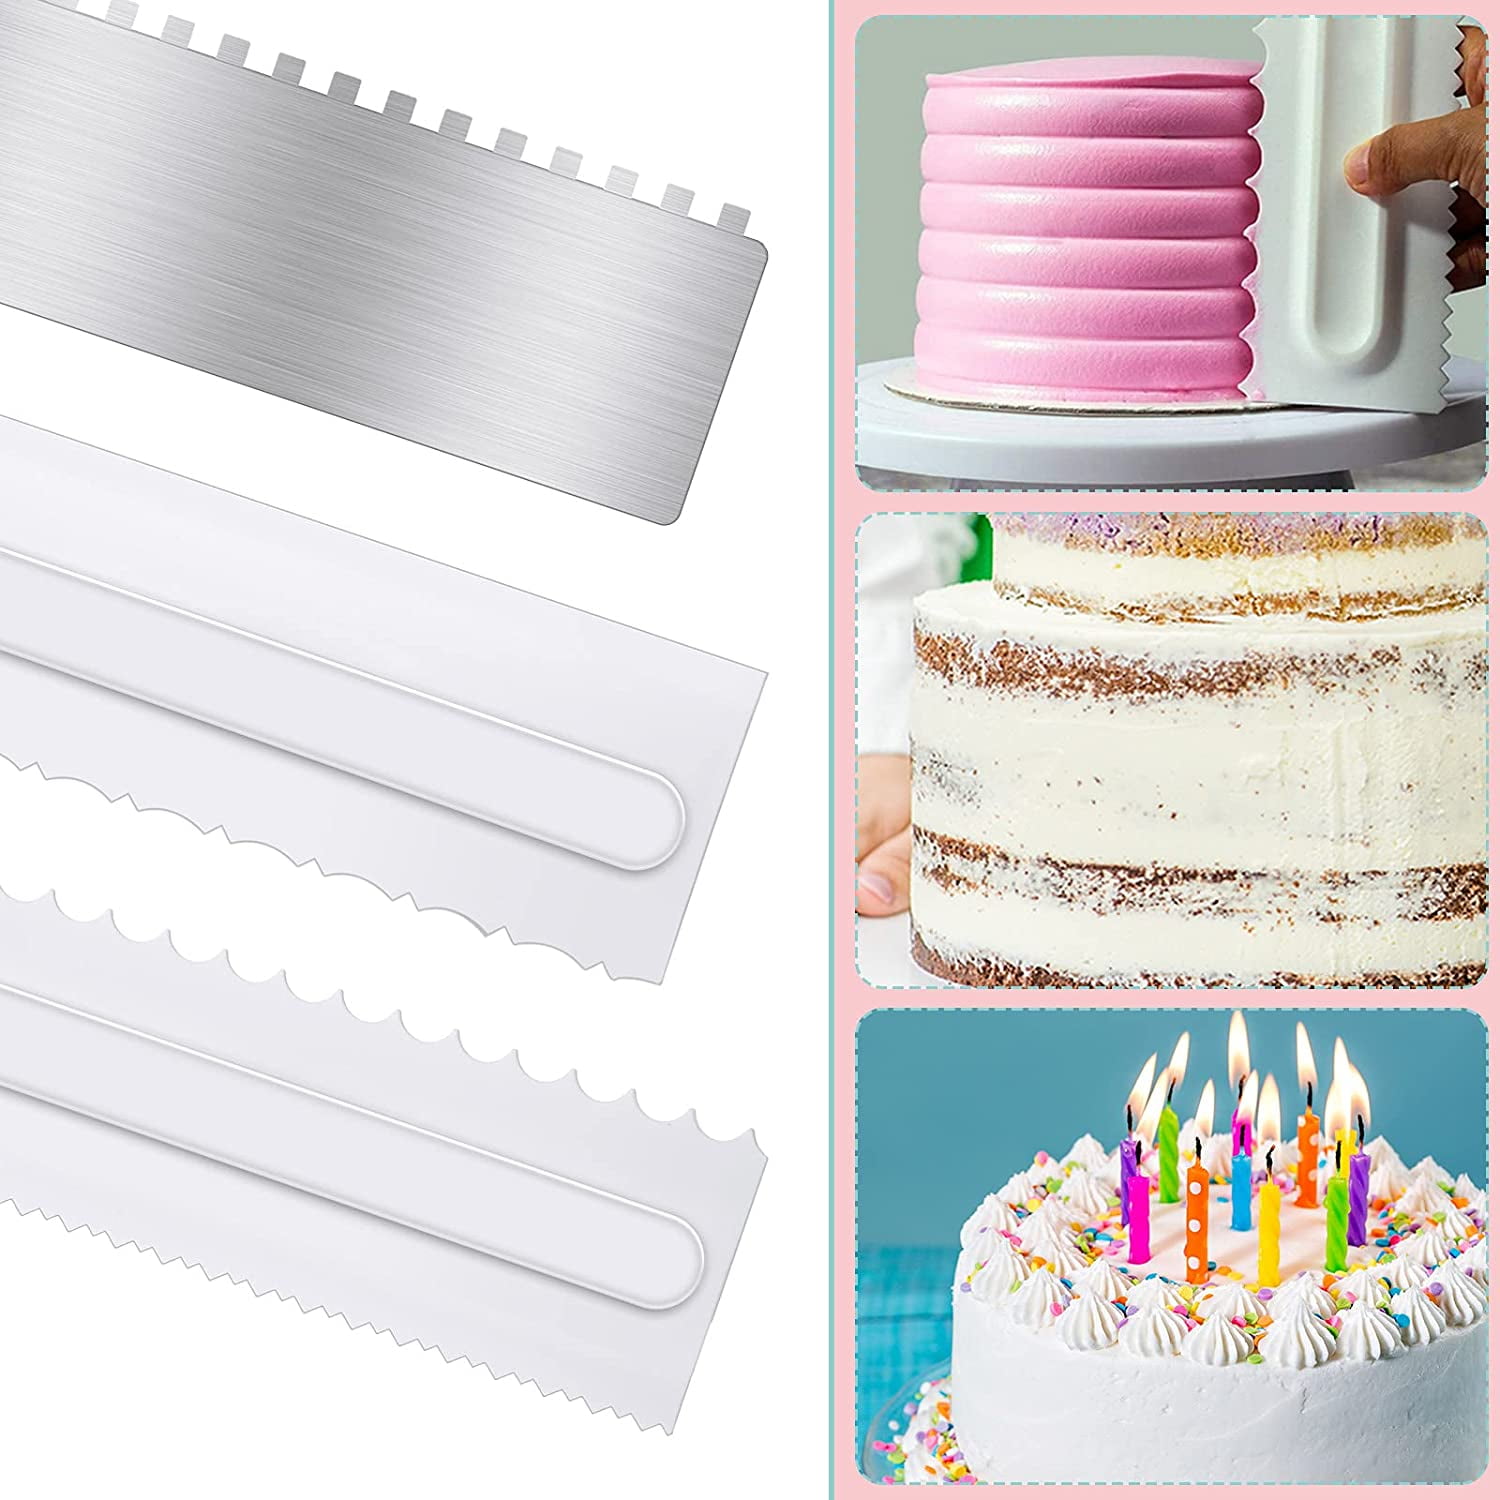 31 Essentials From Walmart To Help Take Your Baking To The Next Level